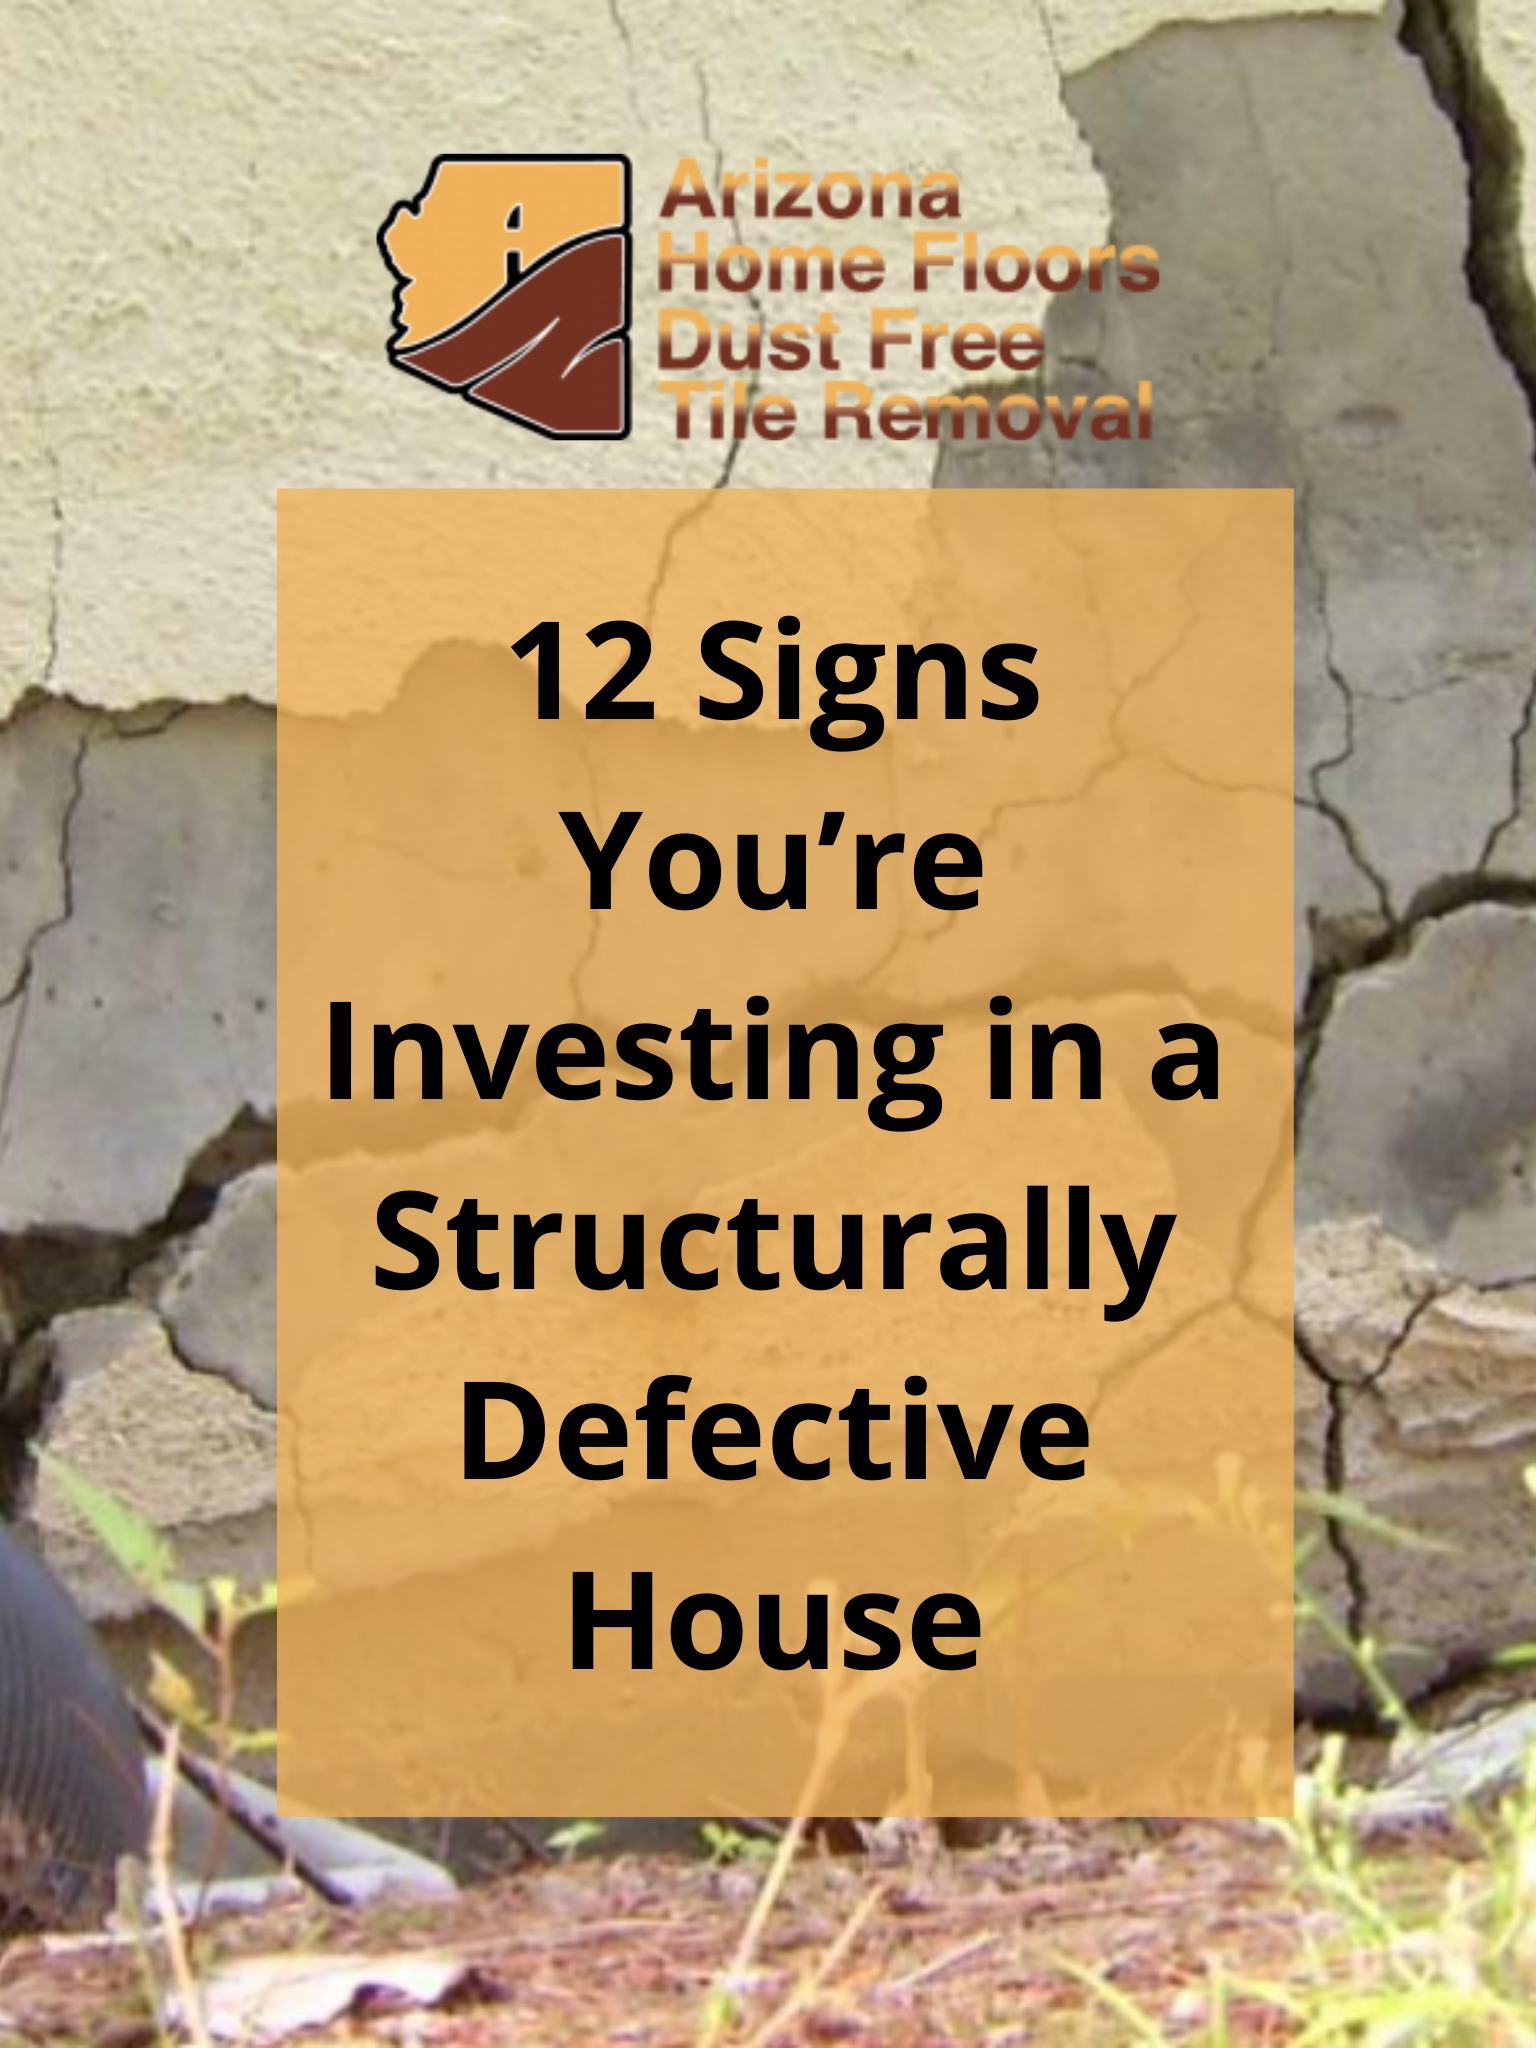 12 Signs You’re Investing in a Structurally Defective House